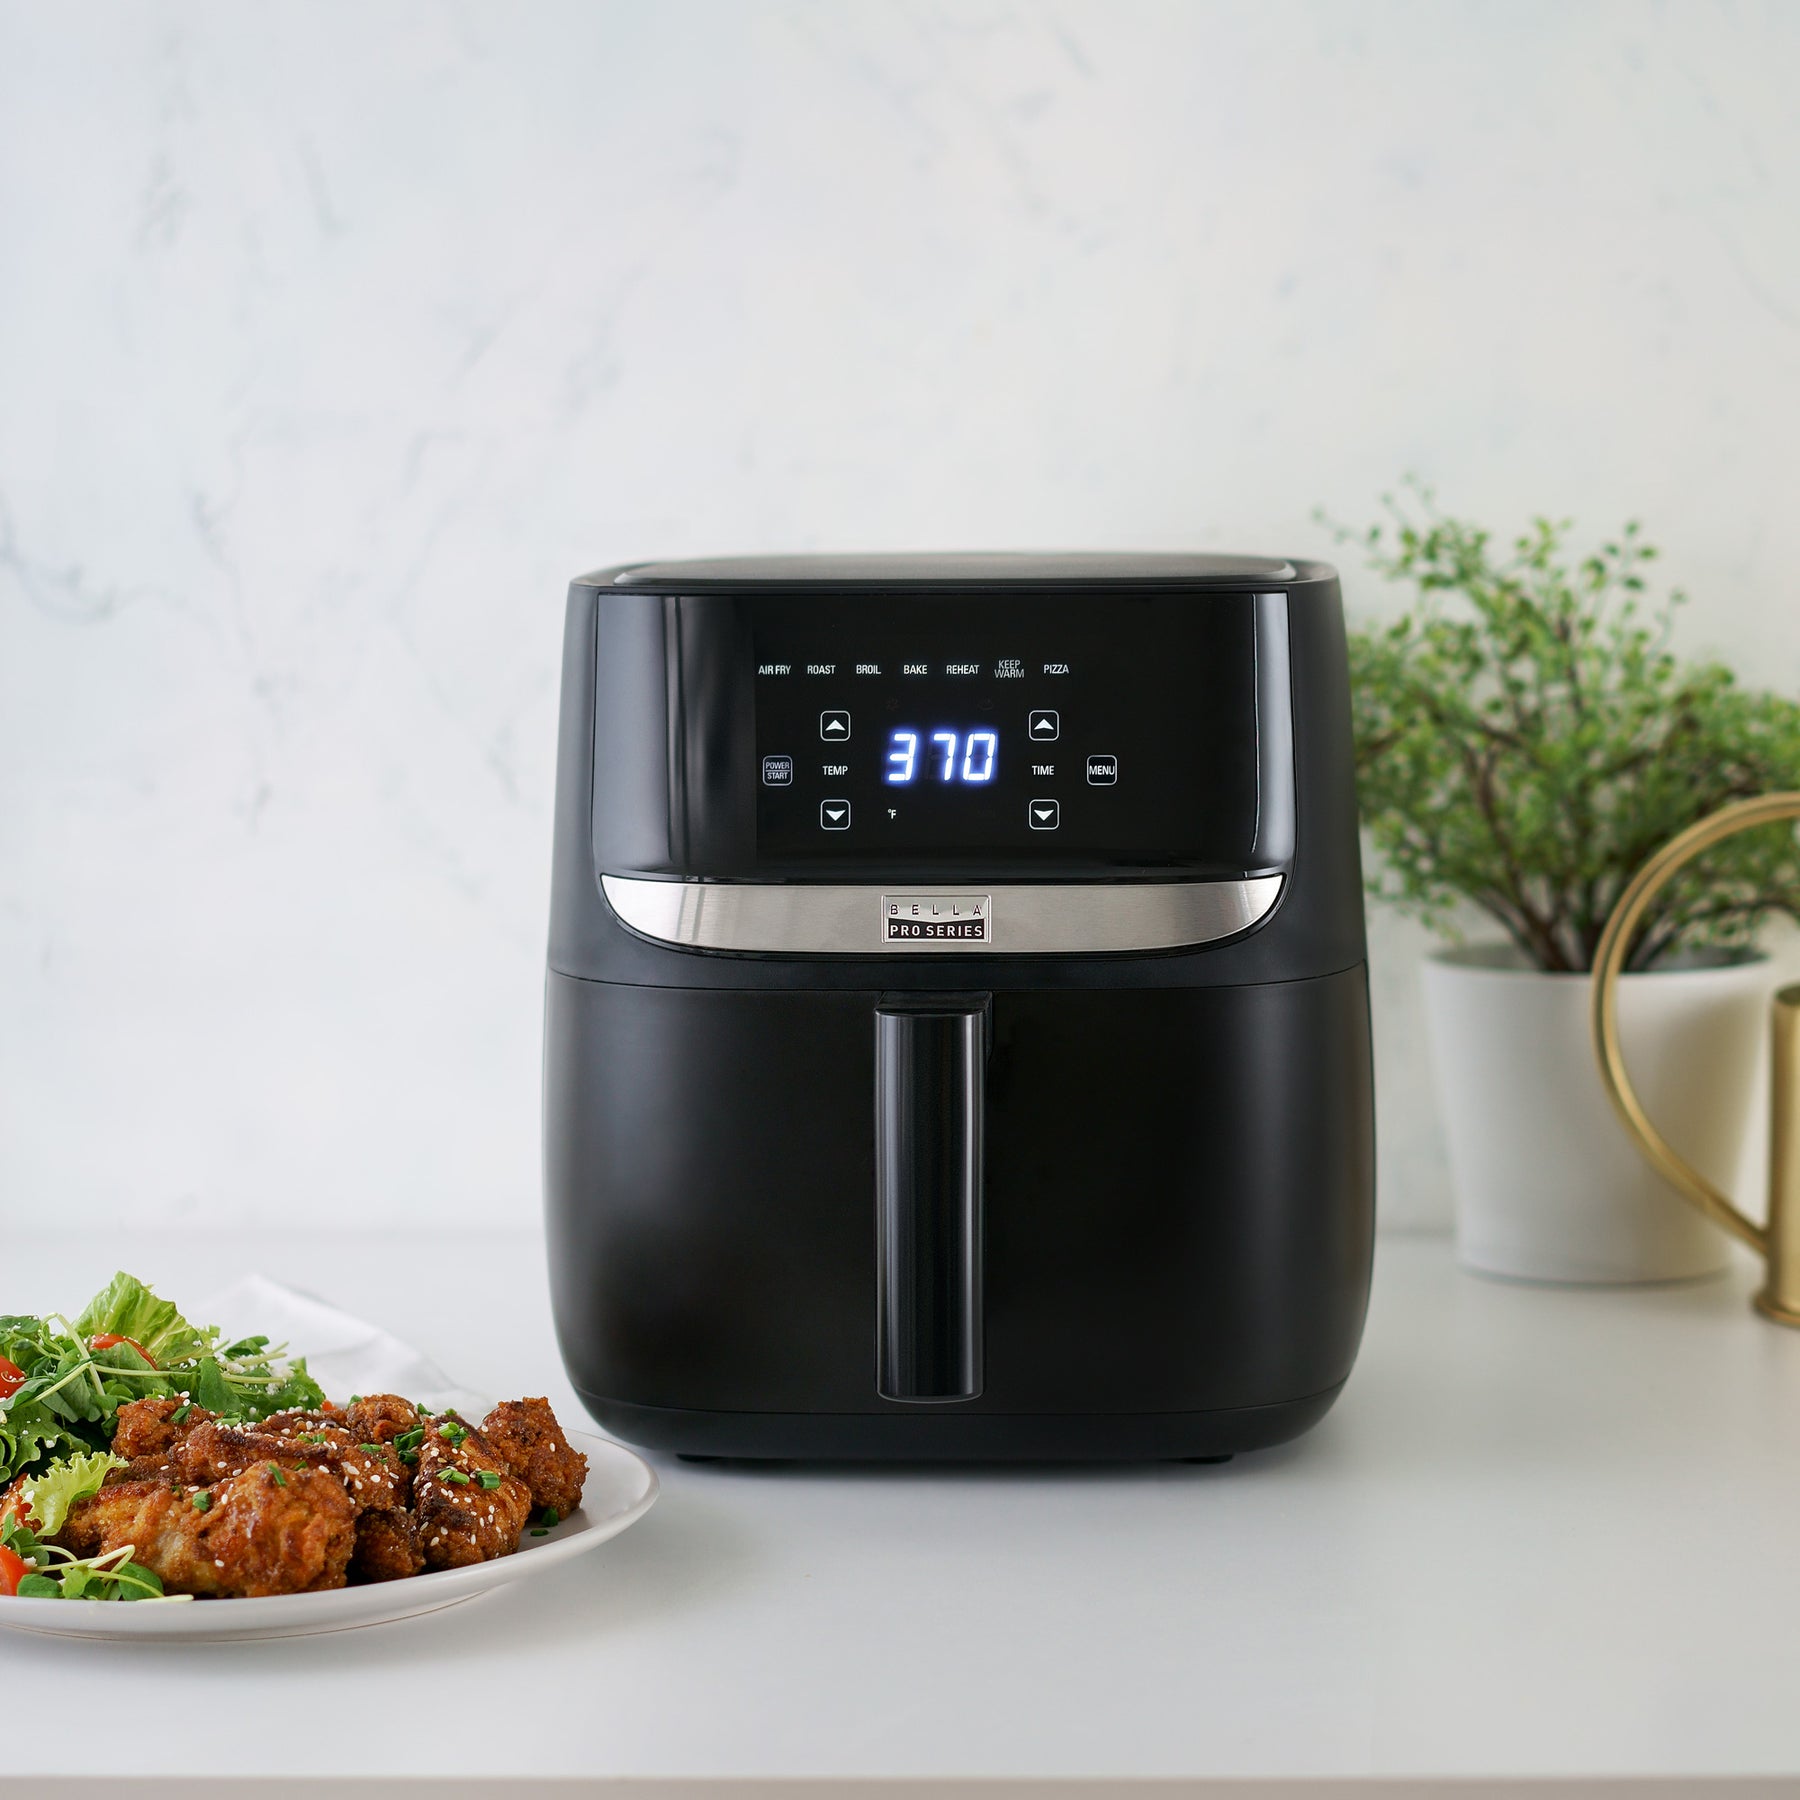 Bella Pro Series 6 qt. Touchscreen Air Fryer in Stainless Steel